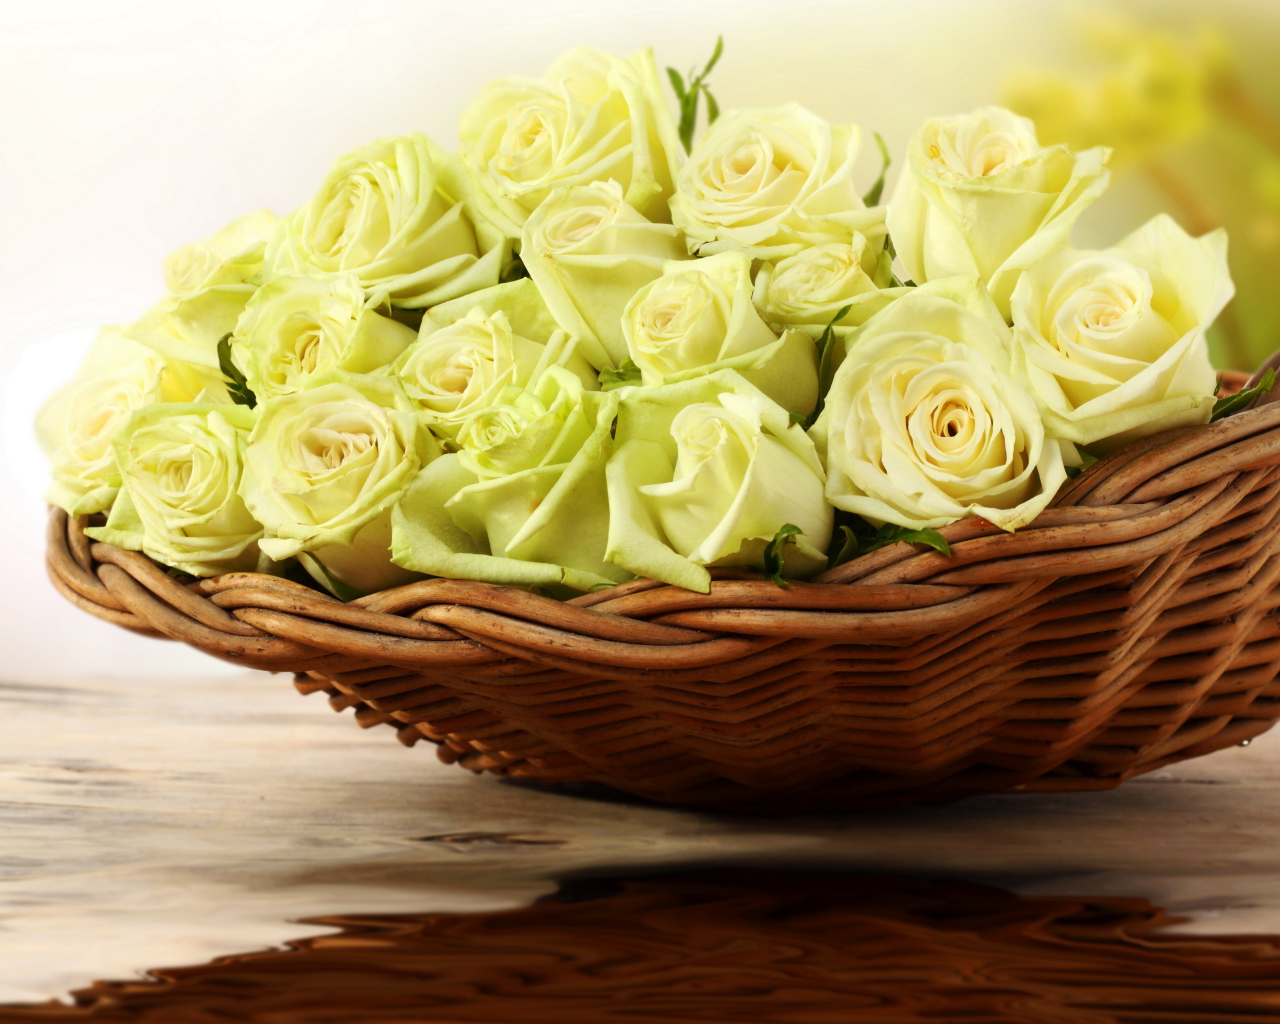 Bouquet of white roses in a wicker basket